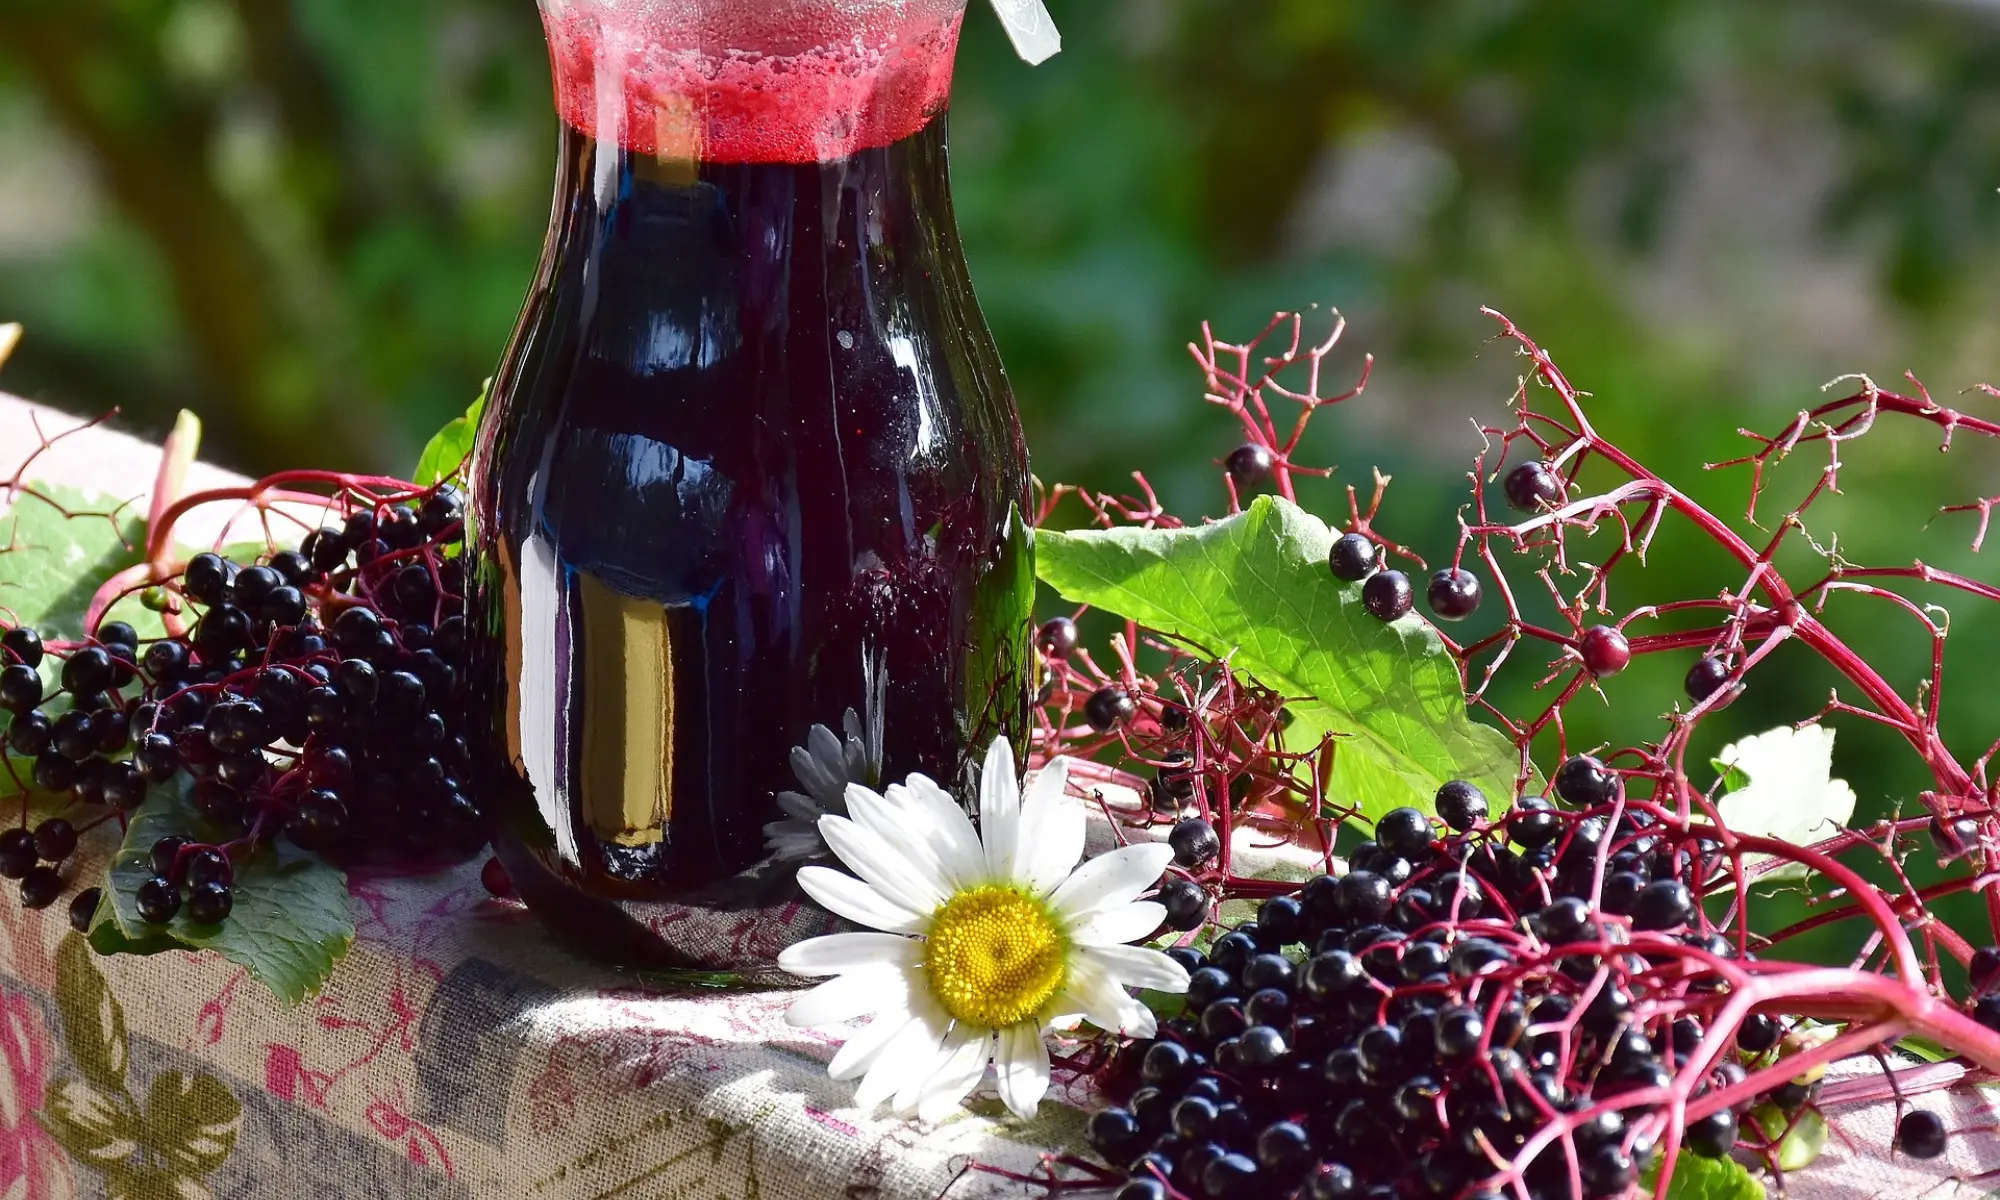 A jar of elderberry juice sitting on a ledge near elderberries on branches and a daisy.